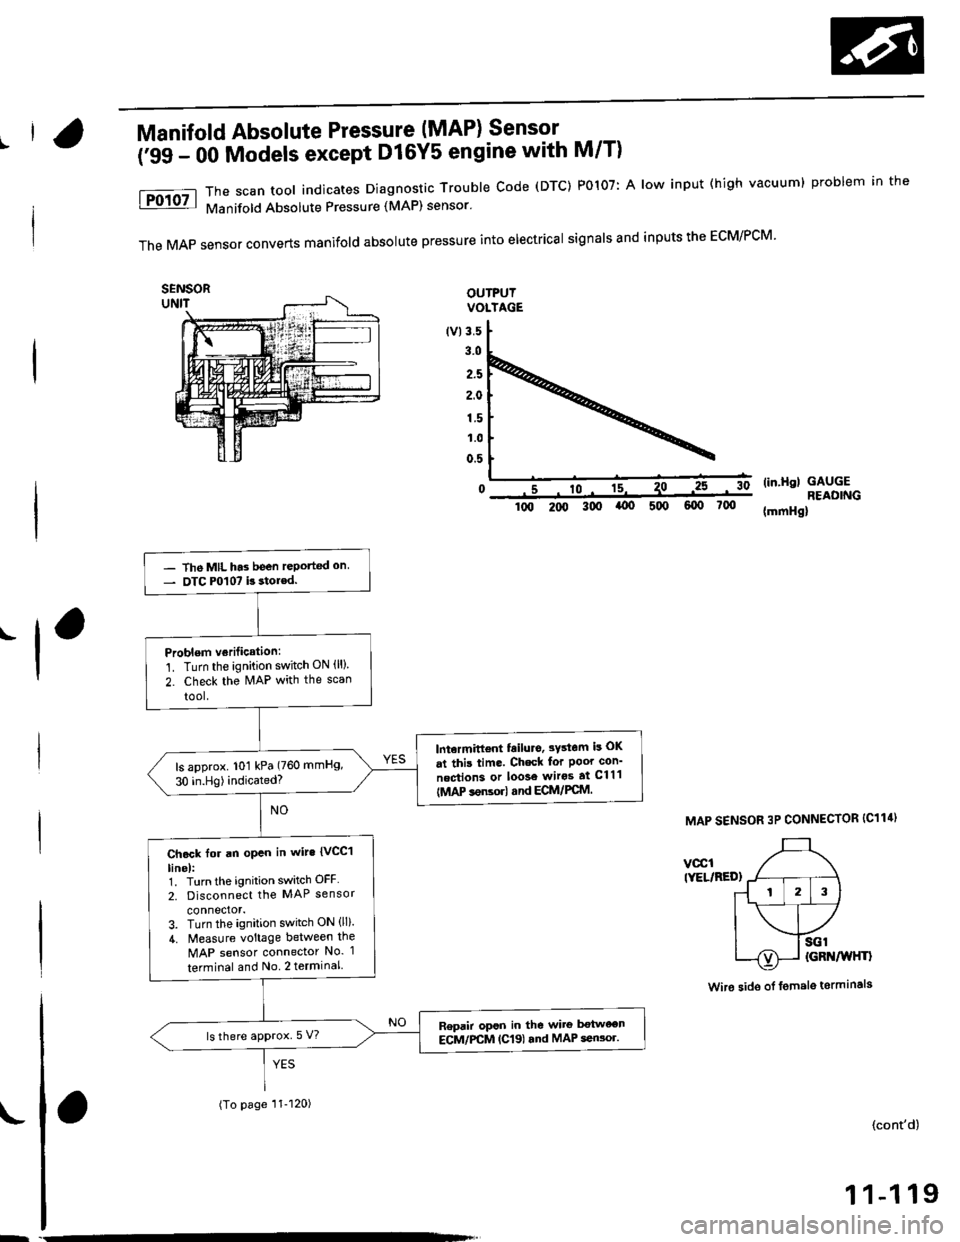 HONDA CIVIC 1998 6.G Owners Manual |Manifold Absolute Pressure (MAP) Sensor
(;gg - OO Models except Dl6Y5 engine with M/T)
The scan tool indicates Diagnostrc Trouble Code (DTC) PO1O7: A low input (high vacuuml problem in the
Manifold 